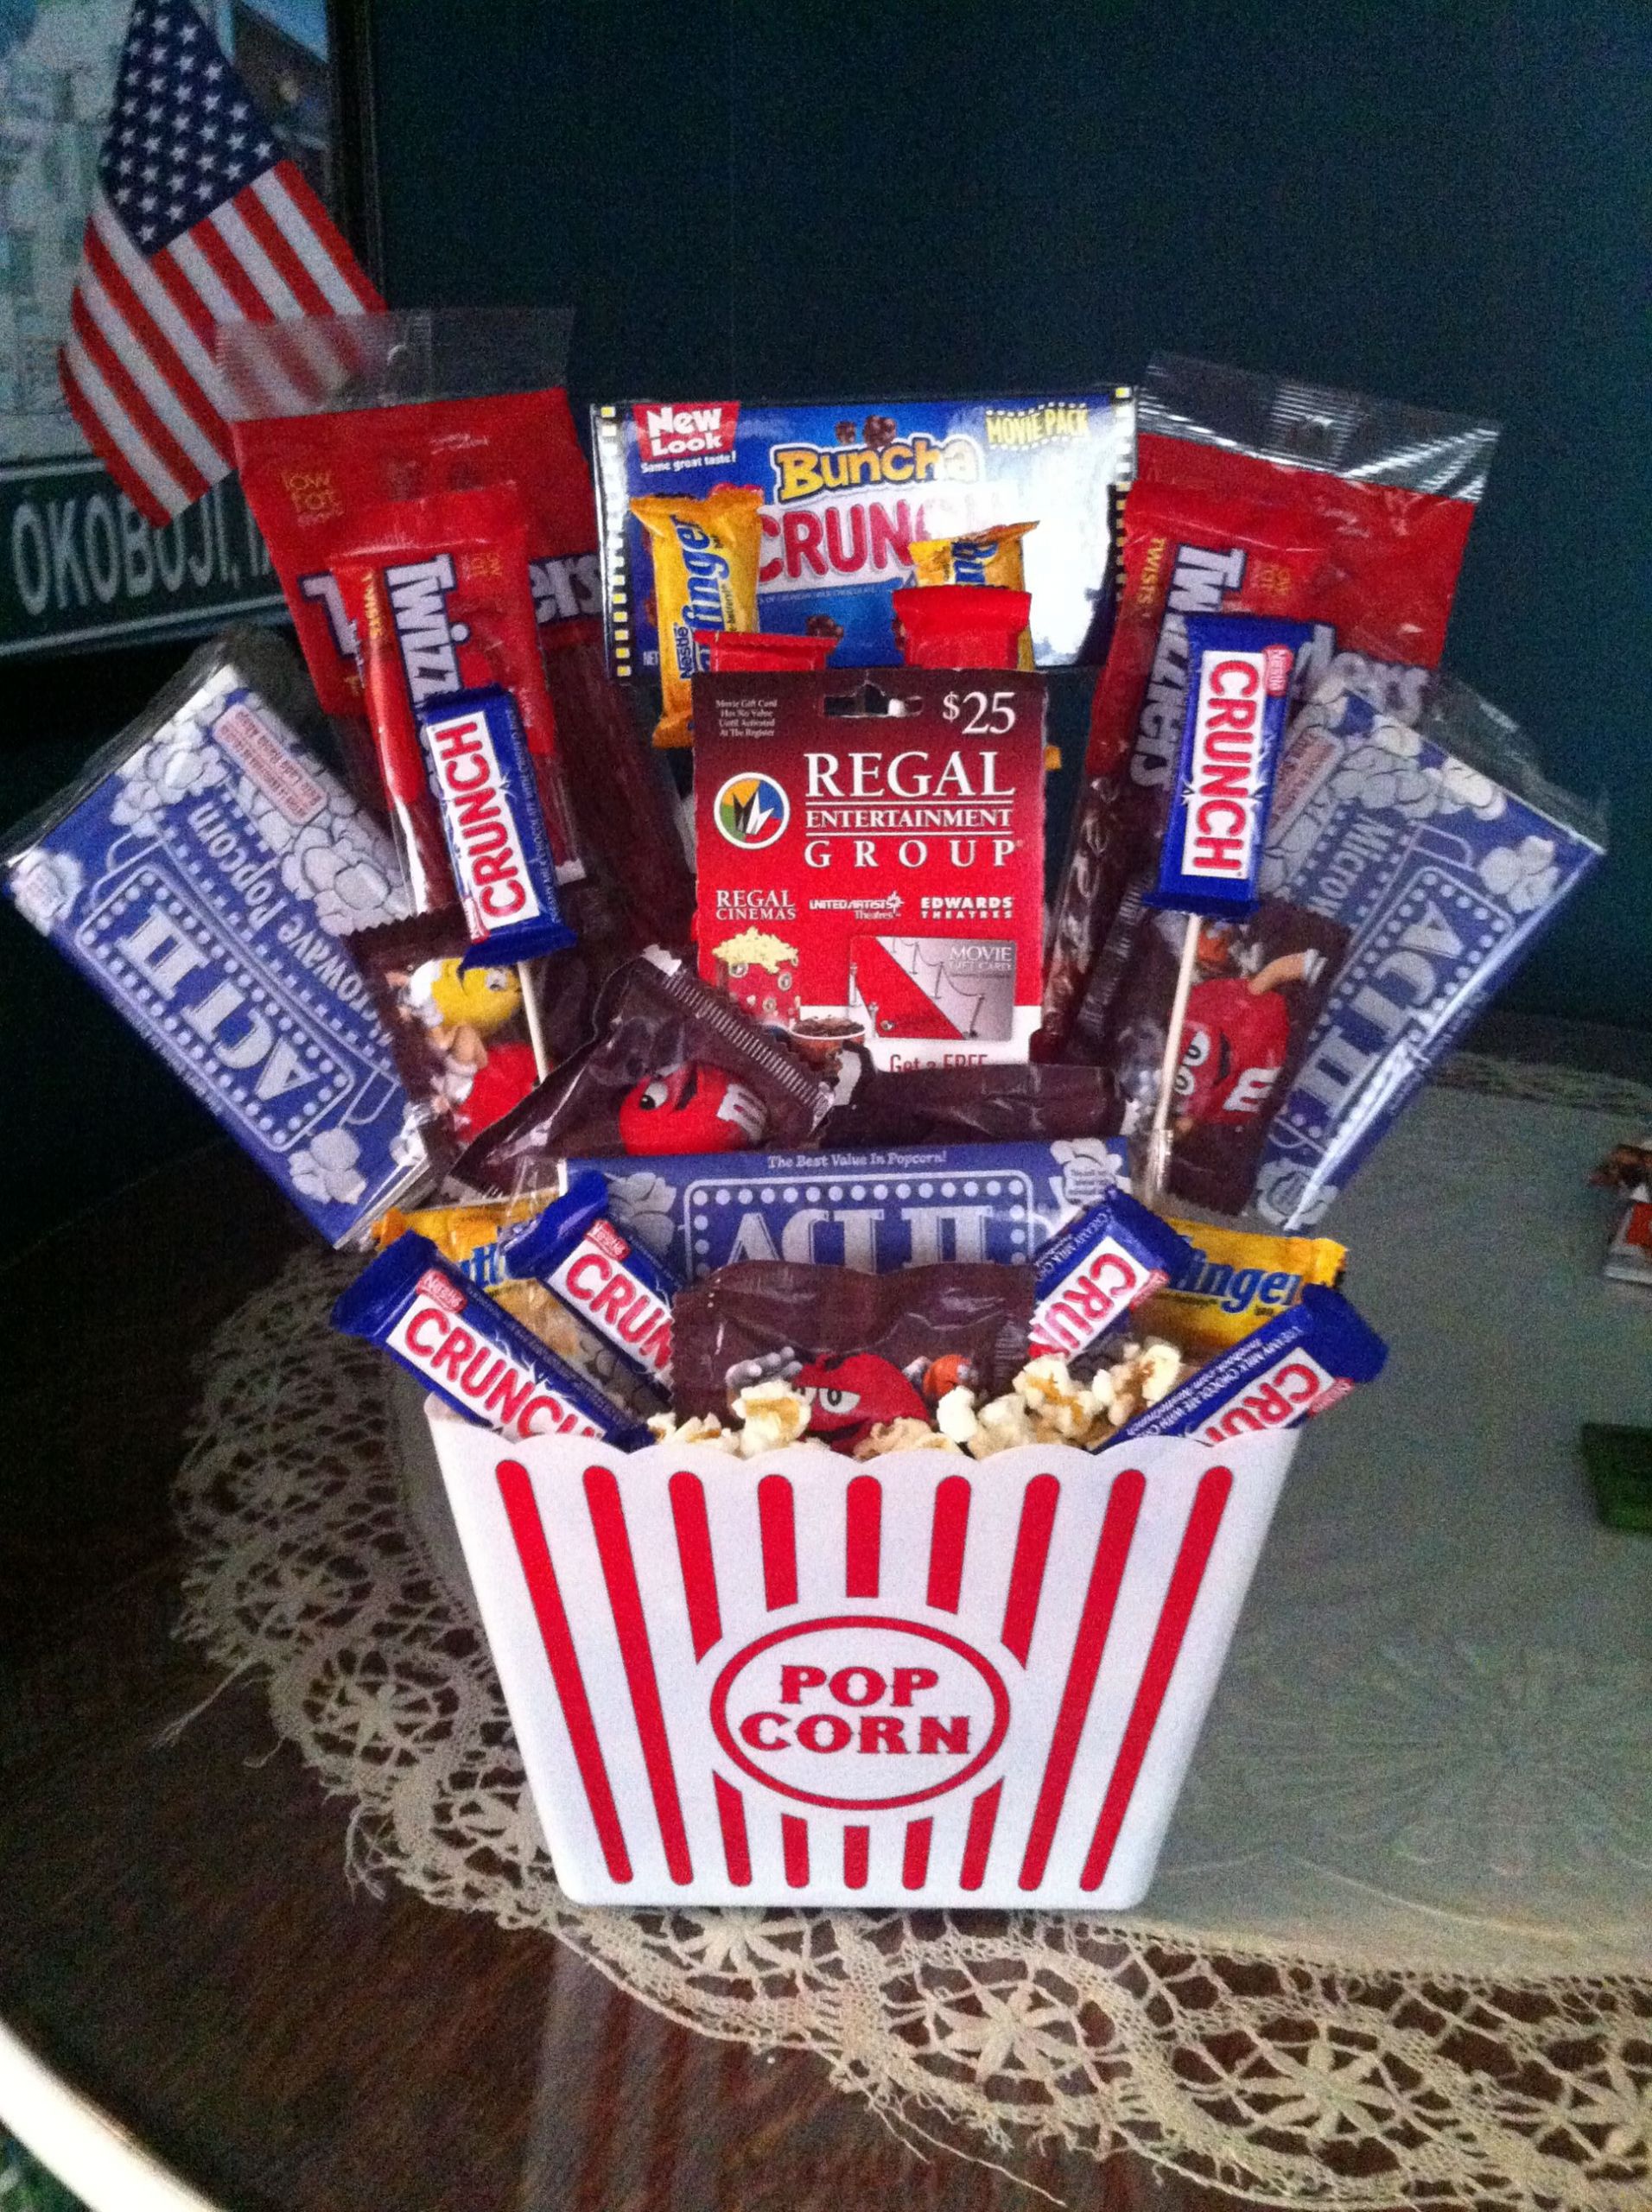 Creative Gift Card Basket Ideas
 Movie themed basket With a regal t card in middle